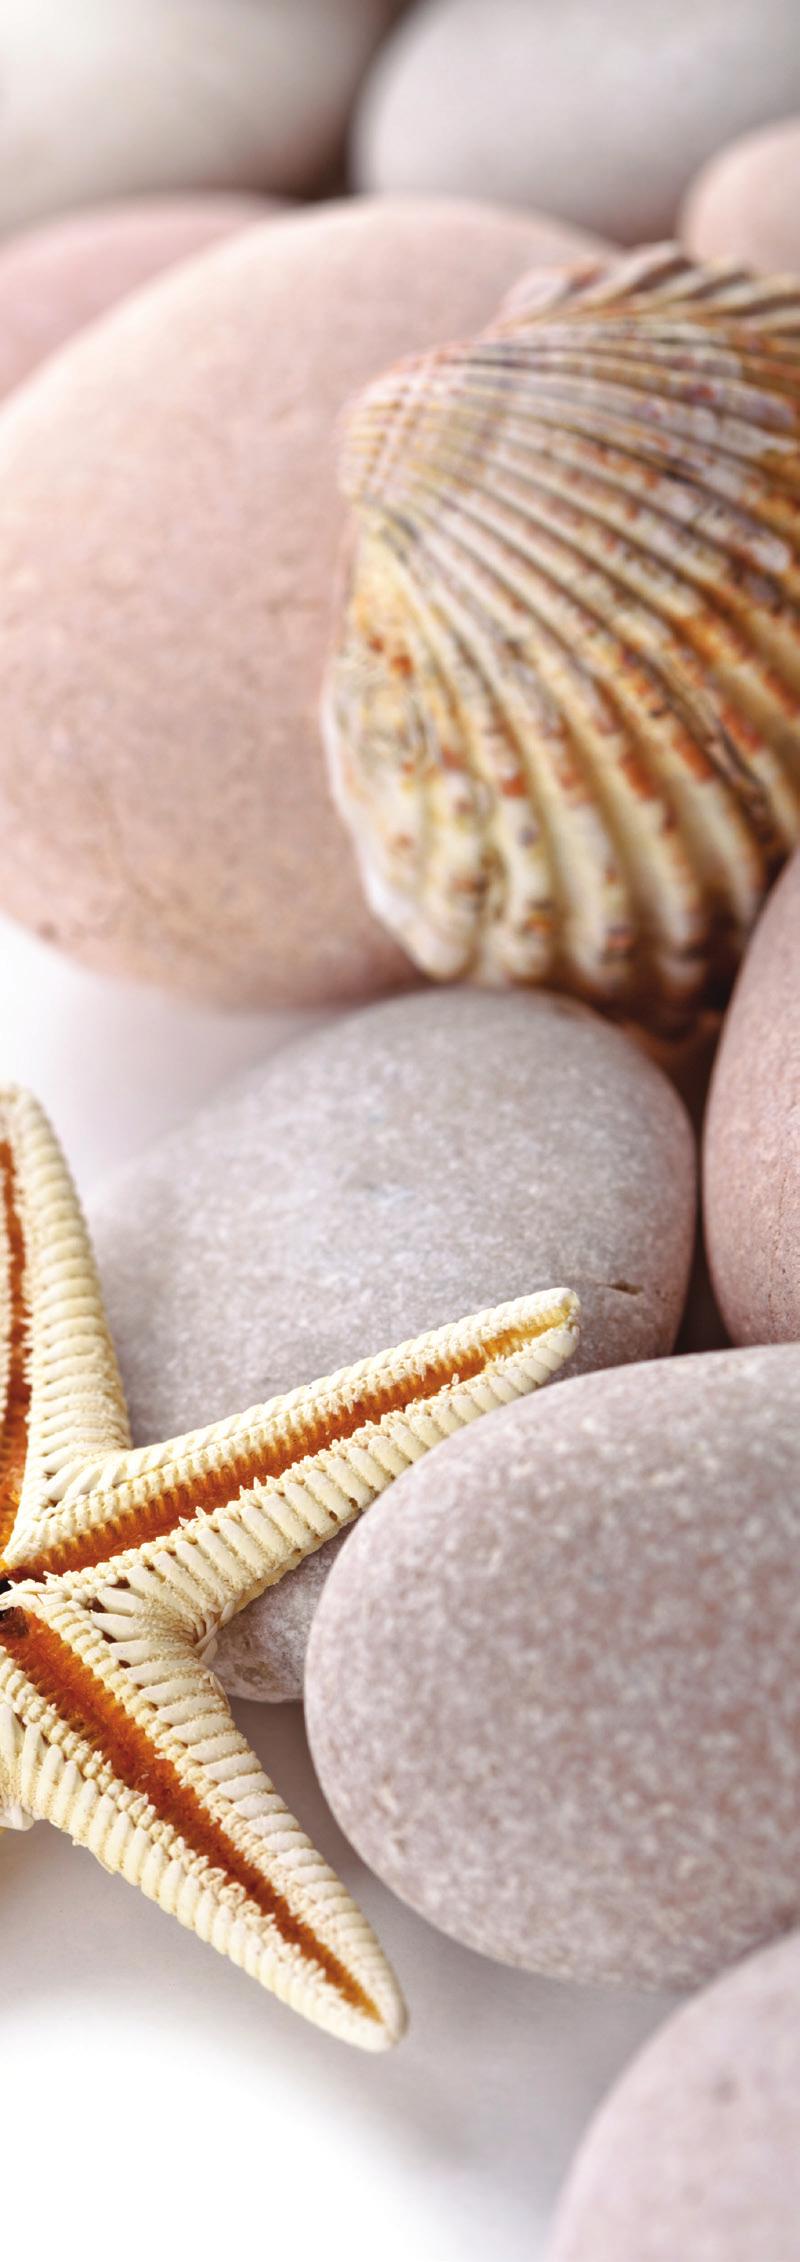 TIME TO RETREAT LAVA SHELL MASSAGE LAVA SHELL FULL BODY MASSAGE (50 mins) 65 This indulgent Lava Shells Relax Body Massage offers an idyllic treatment combining the warmth of the shells with deeply